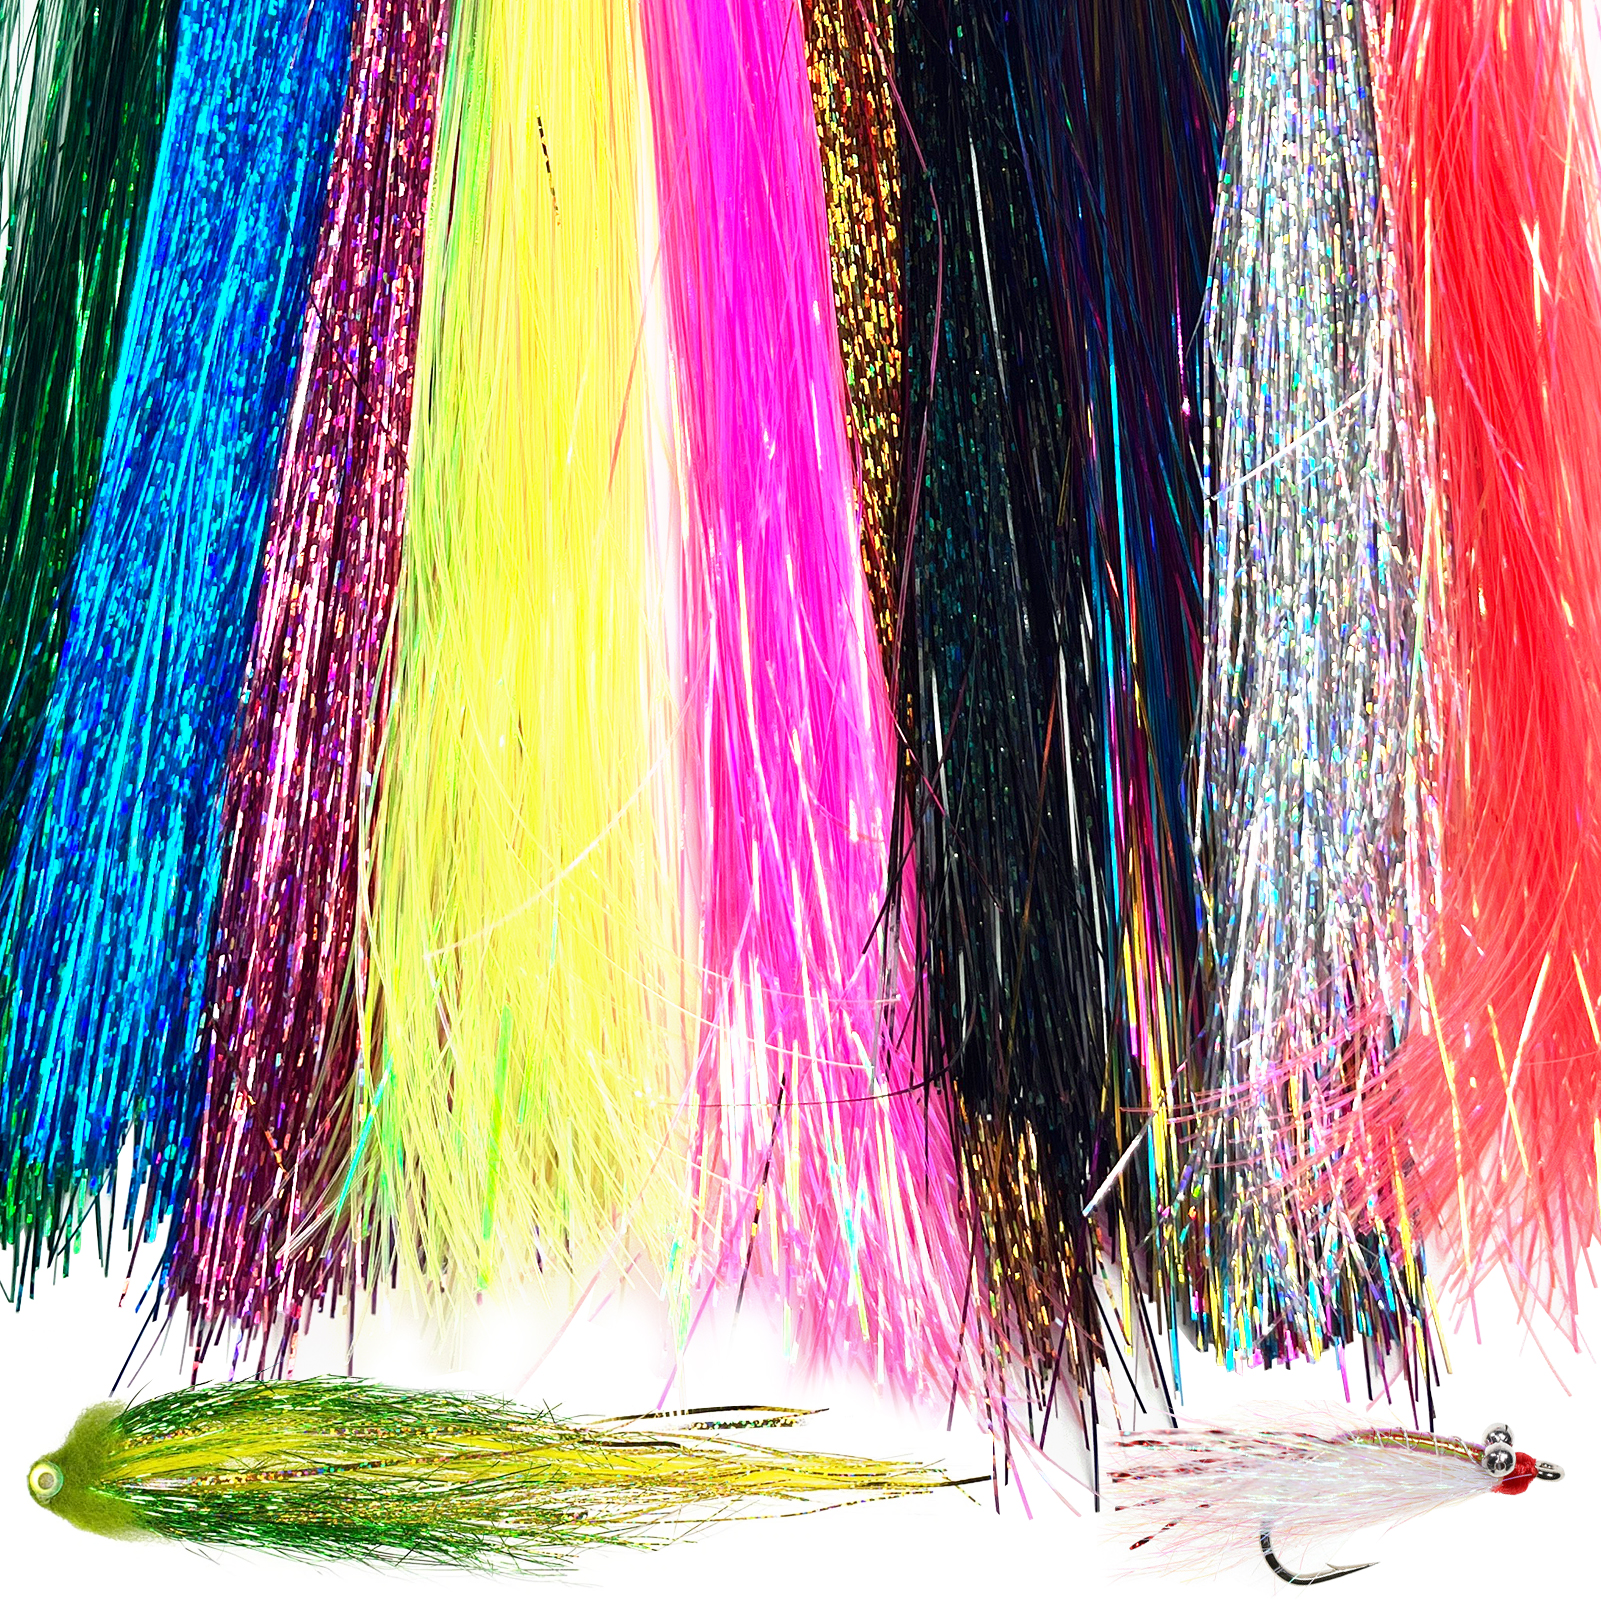 FREE FISHER 24pcs/Set Fishing Crystal Flash Wires 35cm Shining DIY Flies Material Fishing Bait Skirts Spinners Flashabou Tinsel Accessories 